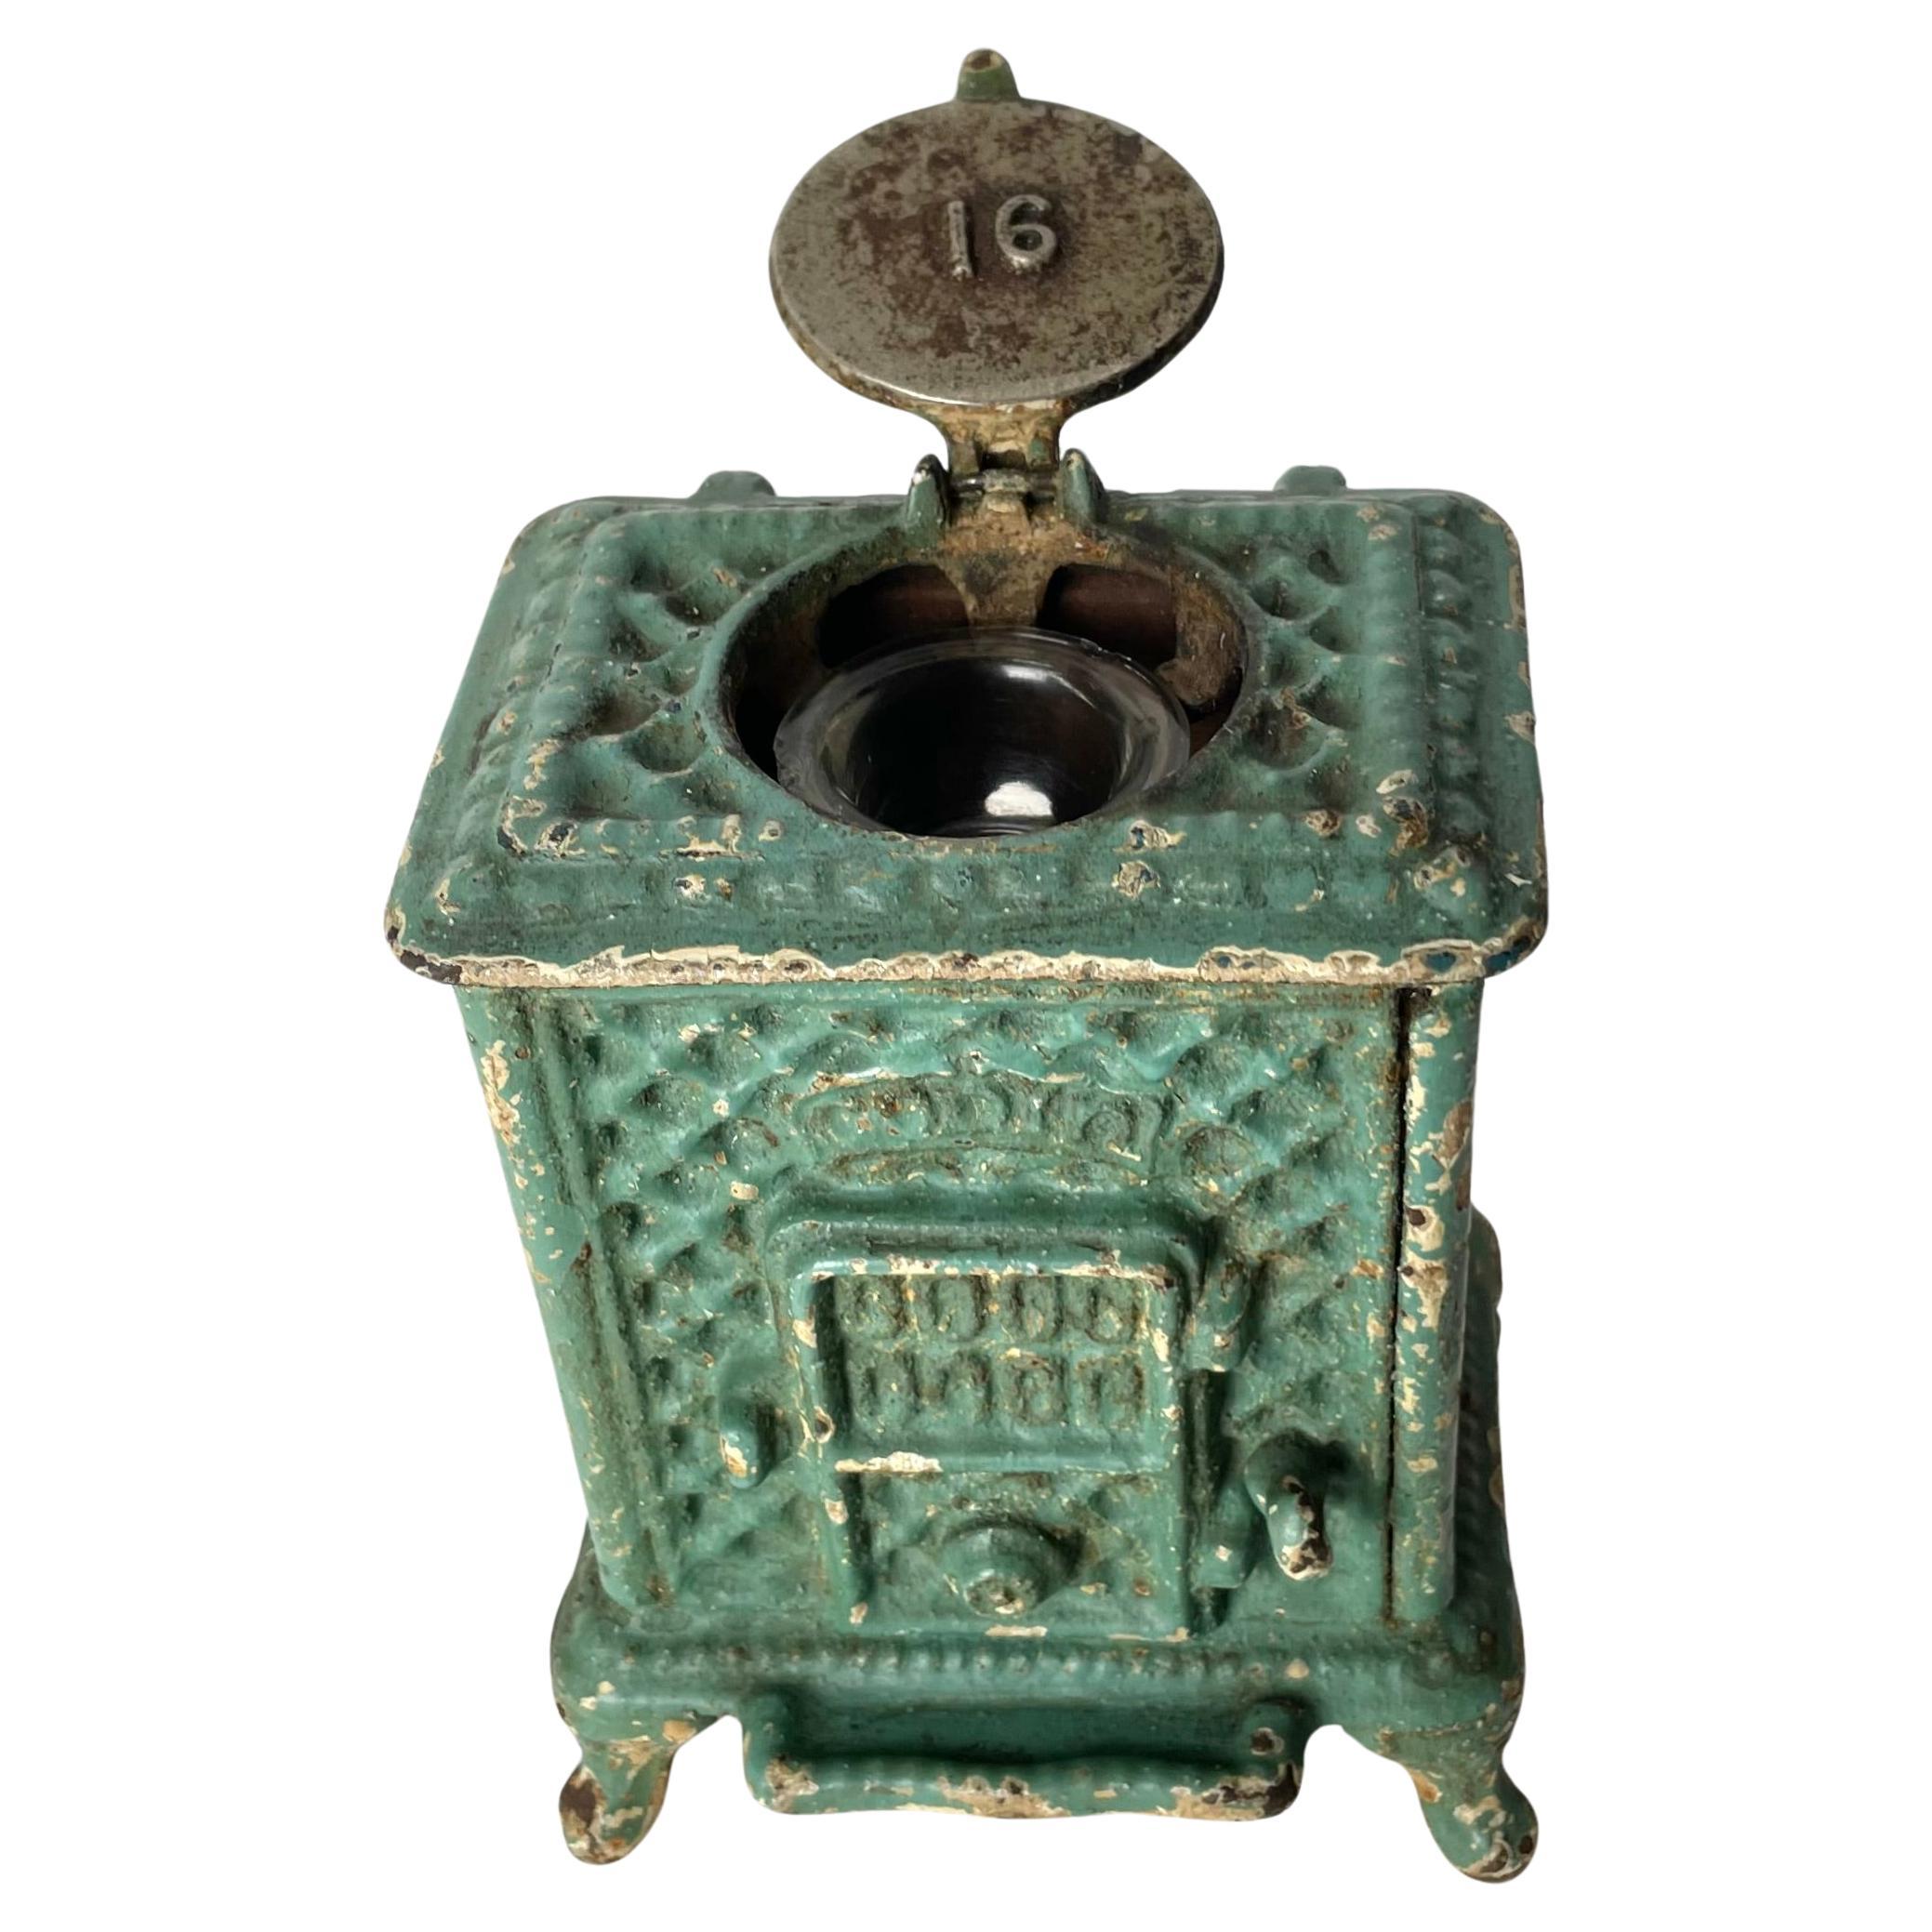 Cool Ink Well designed as a Godin iron stove from the late 19th Century For Sale